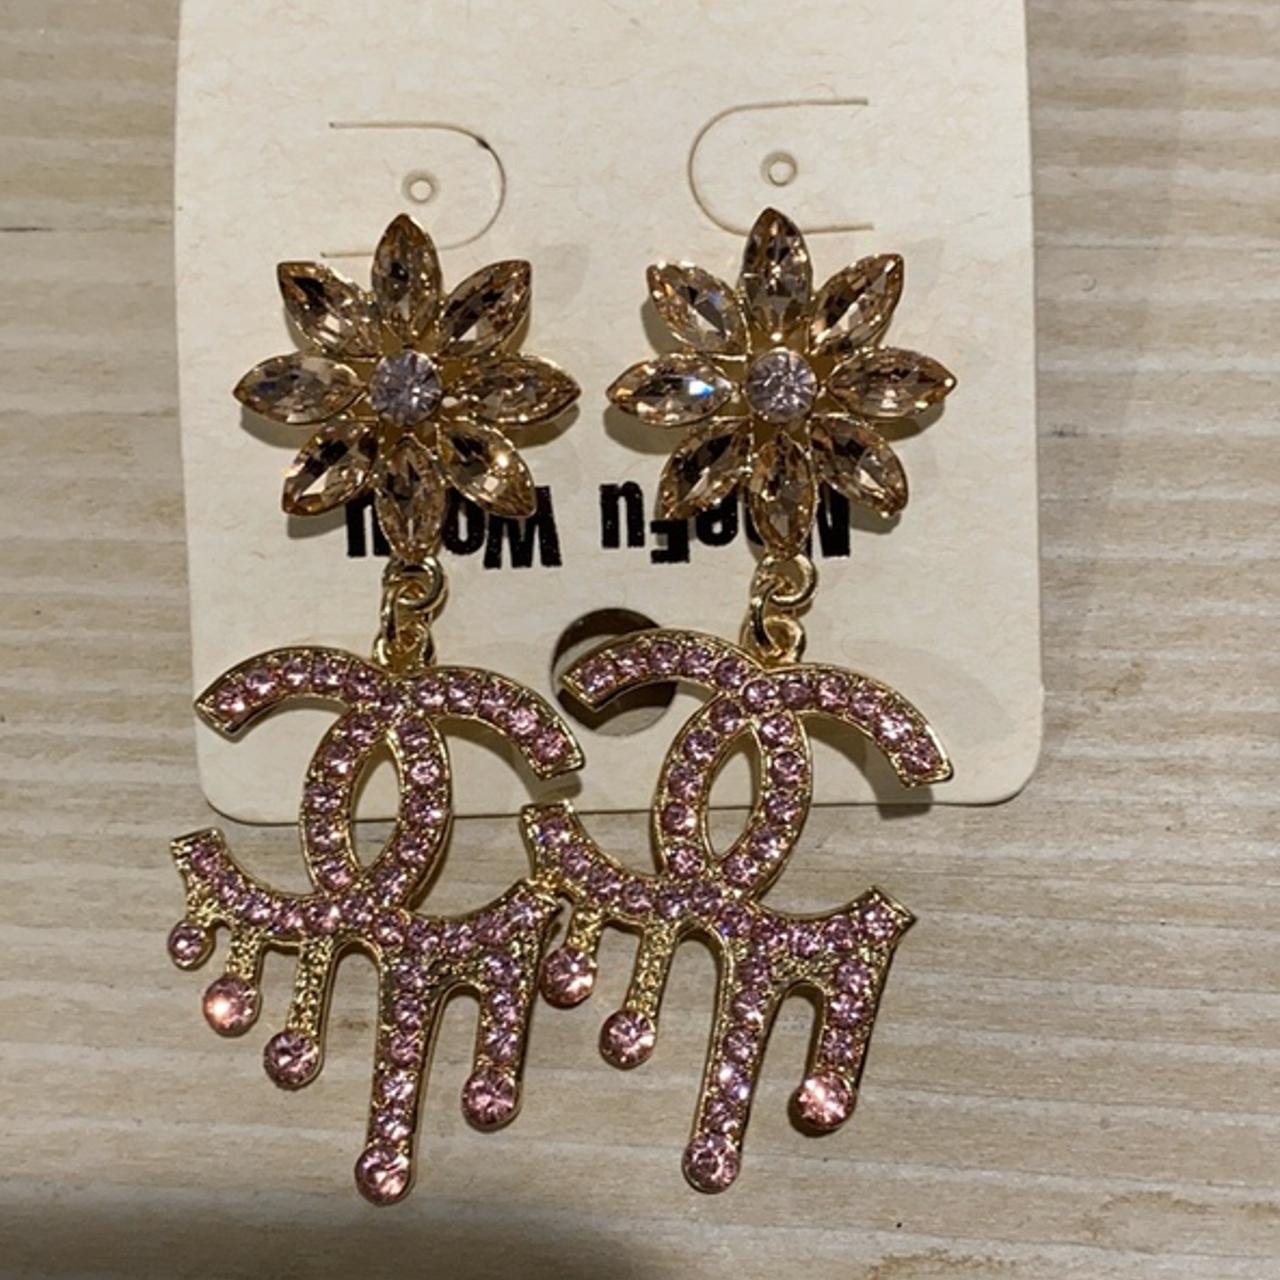 Brand new Chanel drip costume earrings.. several